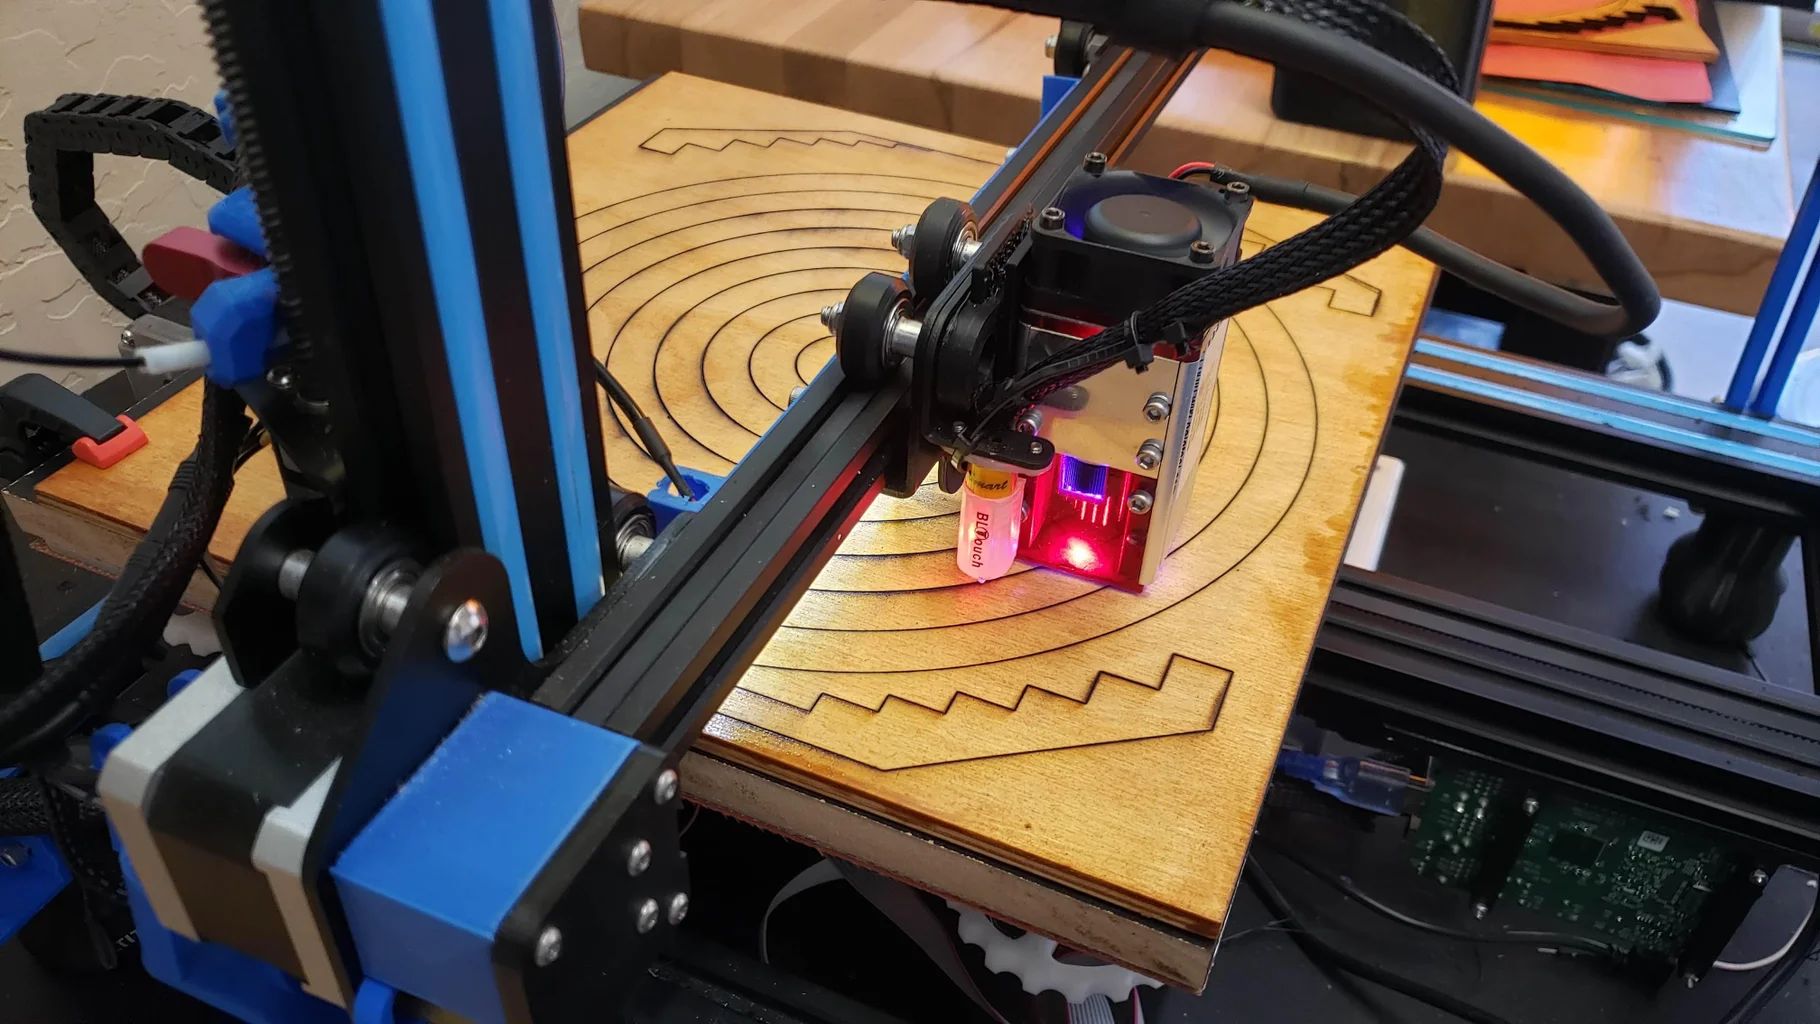 How To Add Laser Engraver To 3D Printer